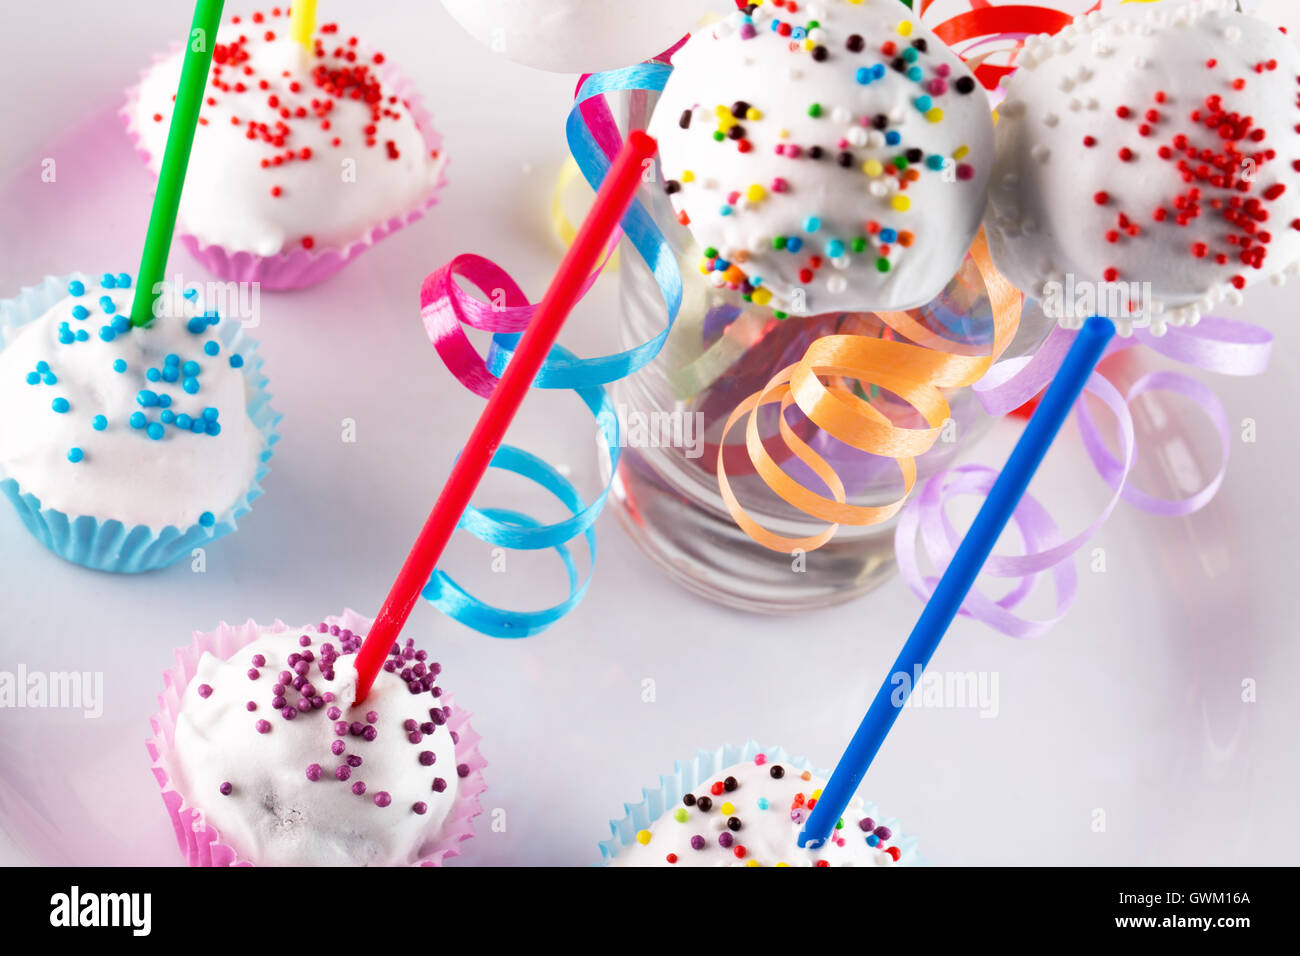 pop candies on white plate. Stock Photo